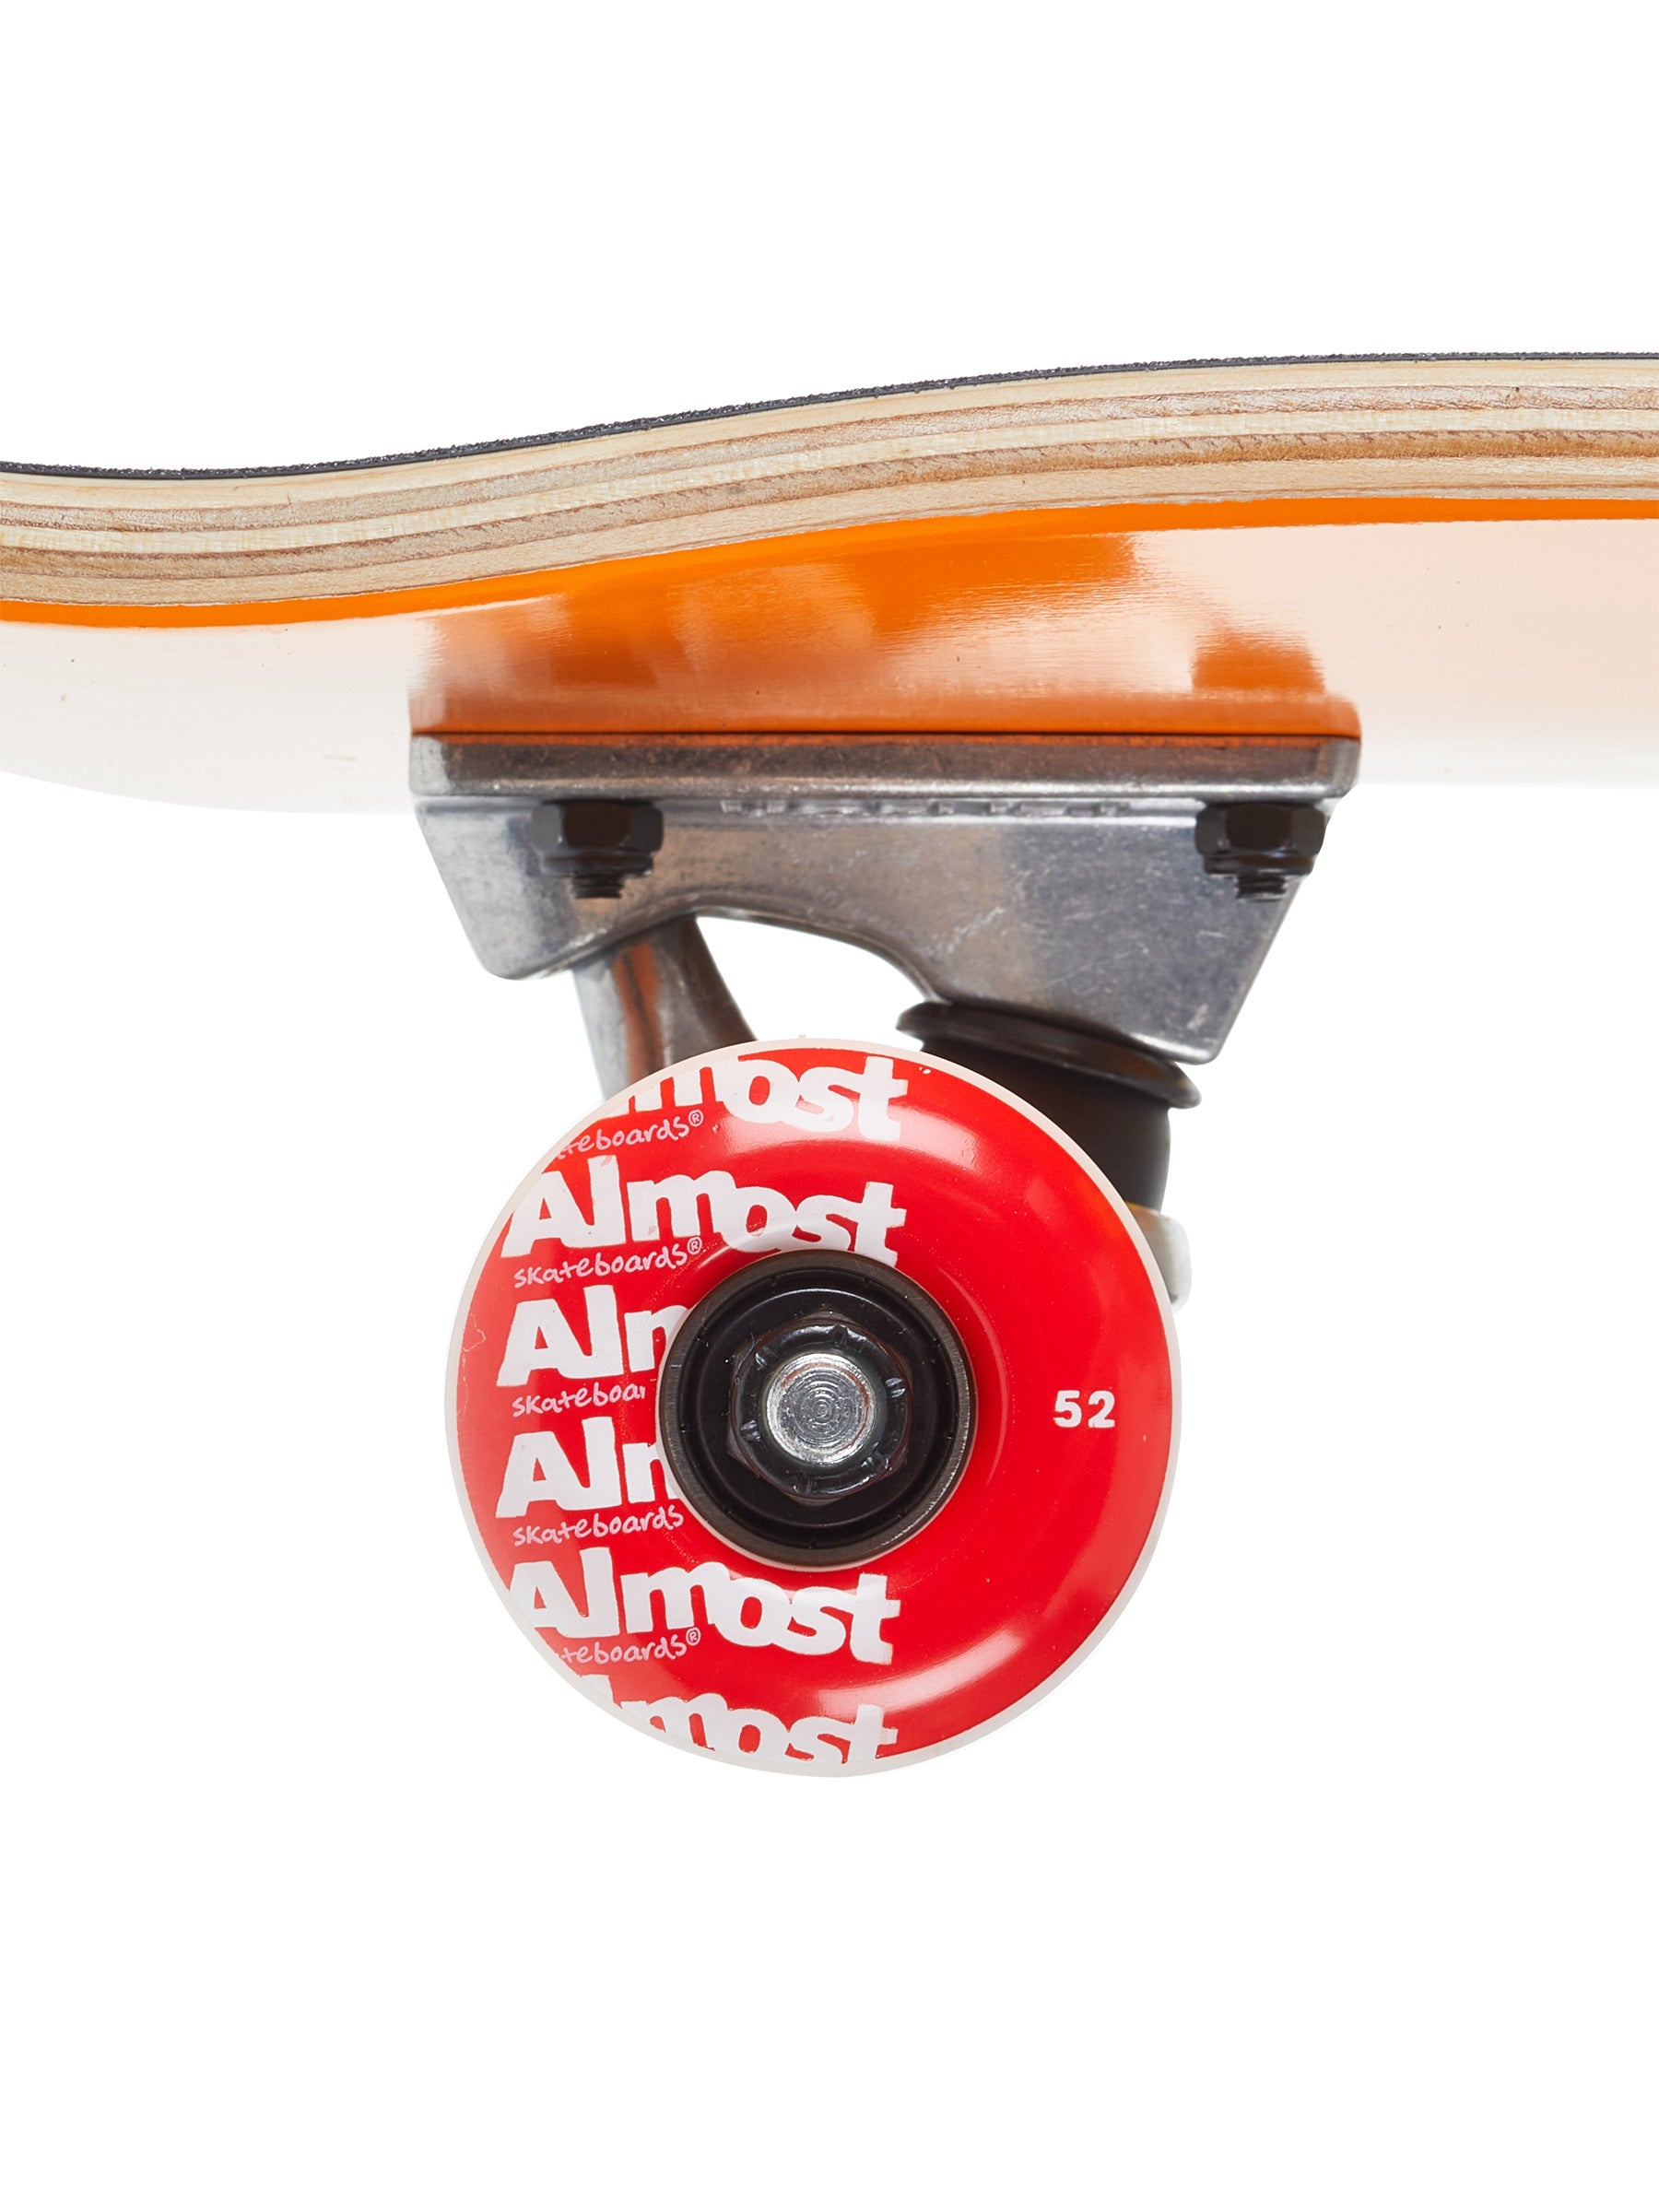 Almost Peace Out 7.875" compleet skateboard